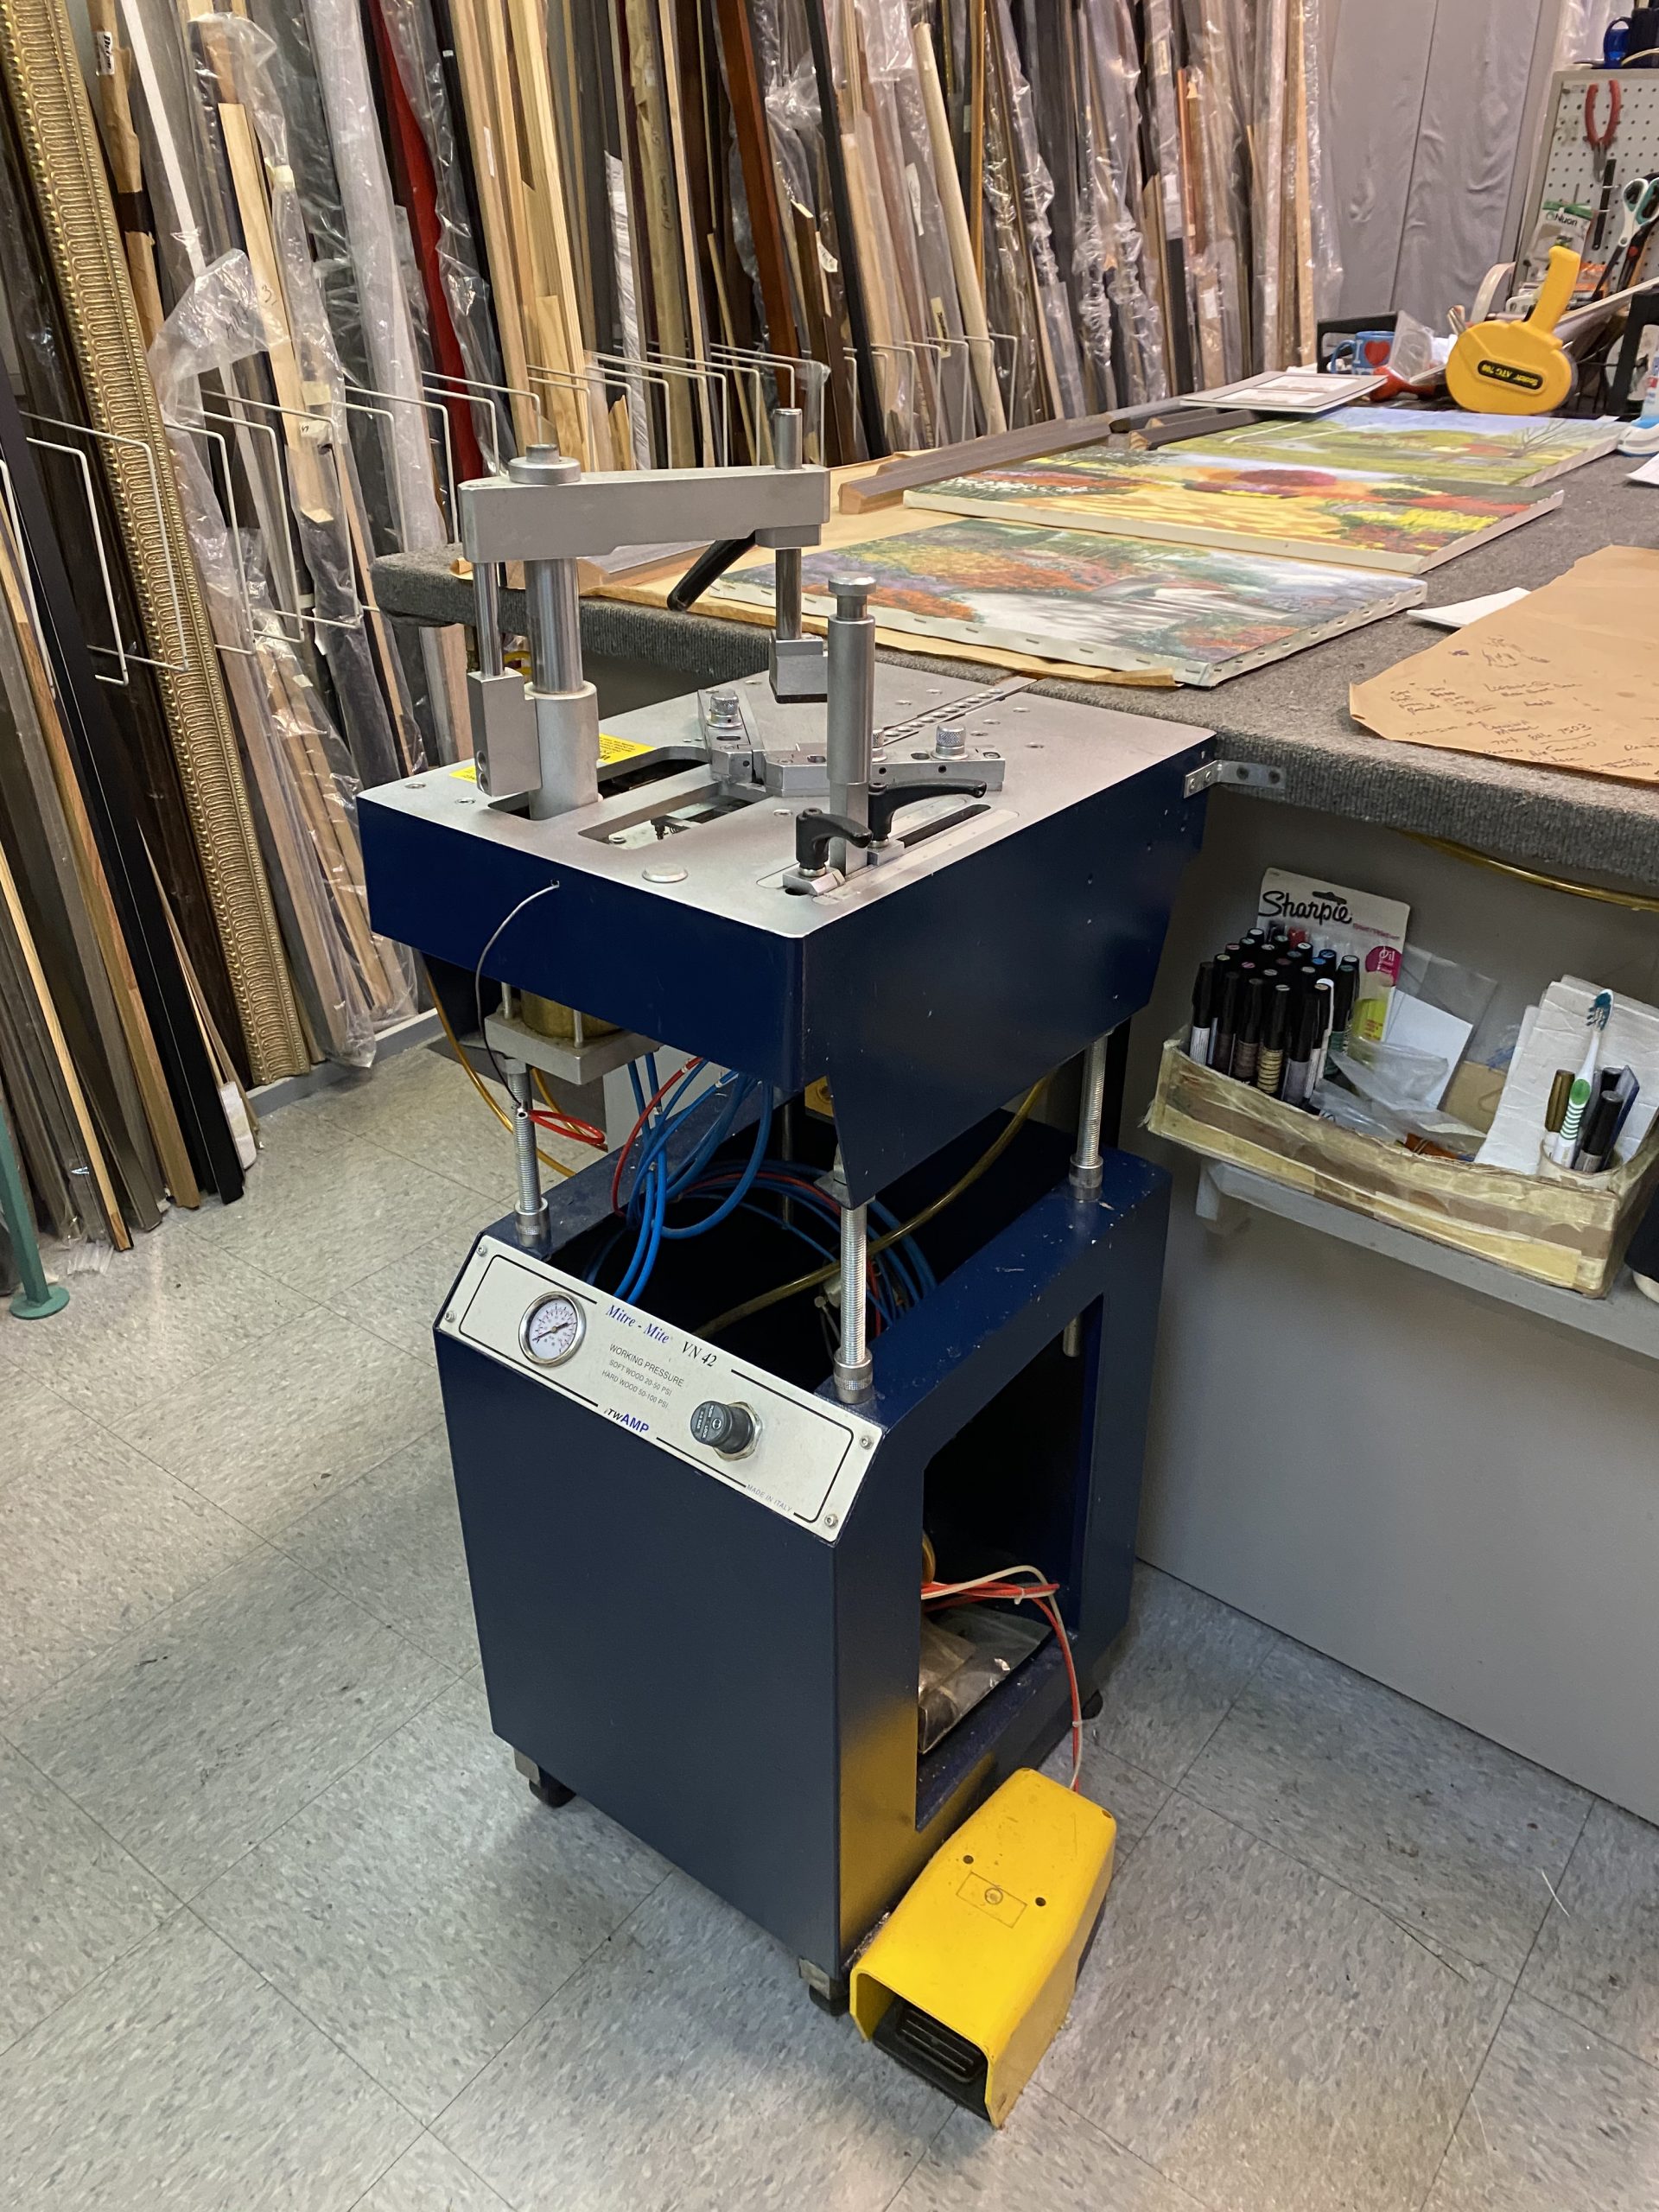 Picture Framing Equipment Lot: Vacuseal 4468H Dry Mount Press, ITW AMP VN42 Vnailer, Fletcher 3000 Glass Cutter (used) Item # UE-061920E (North Carolina)